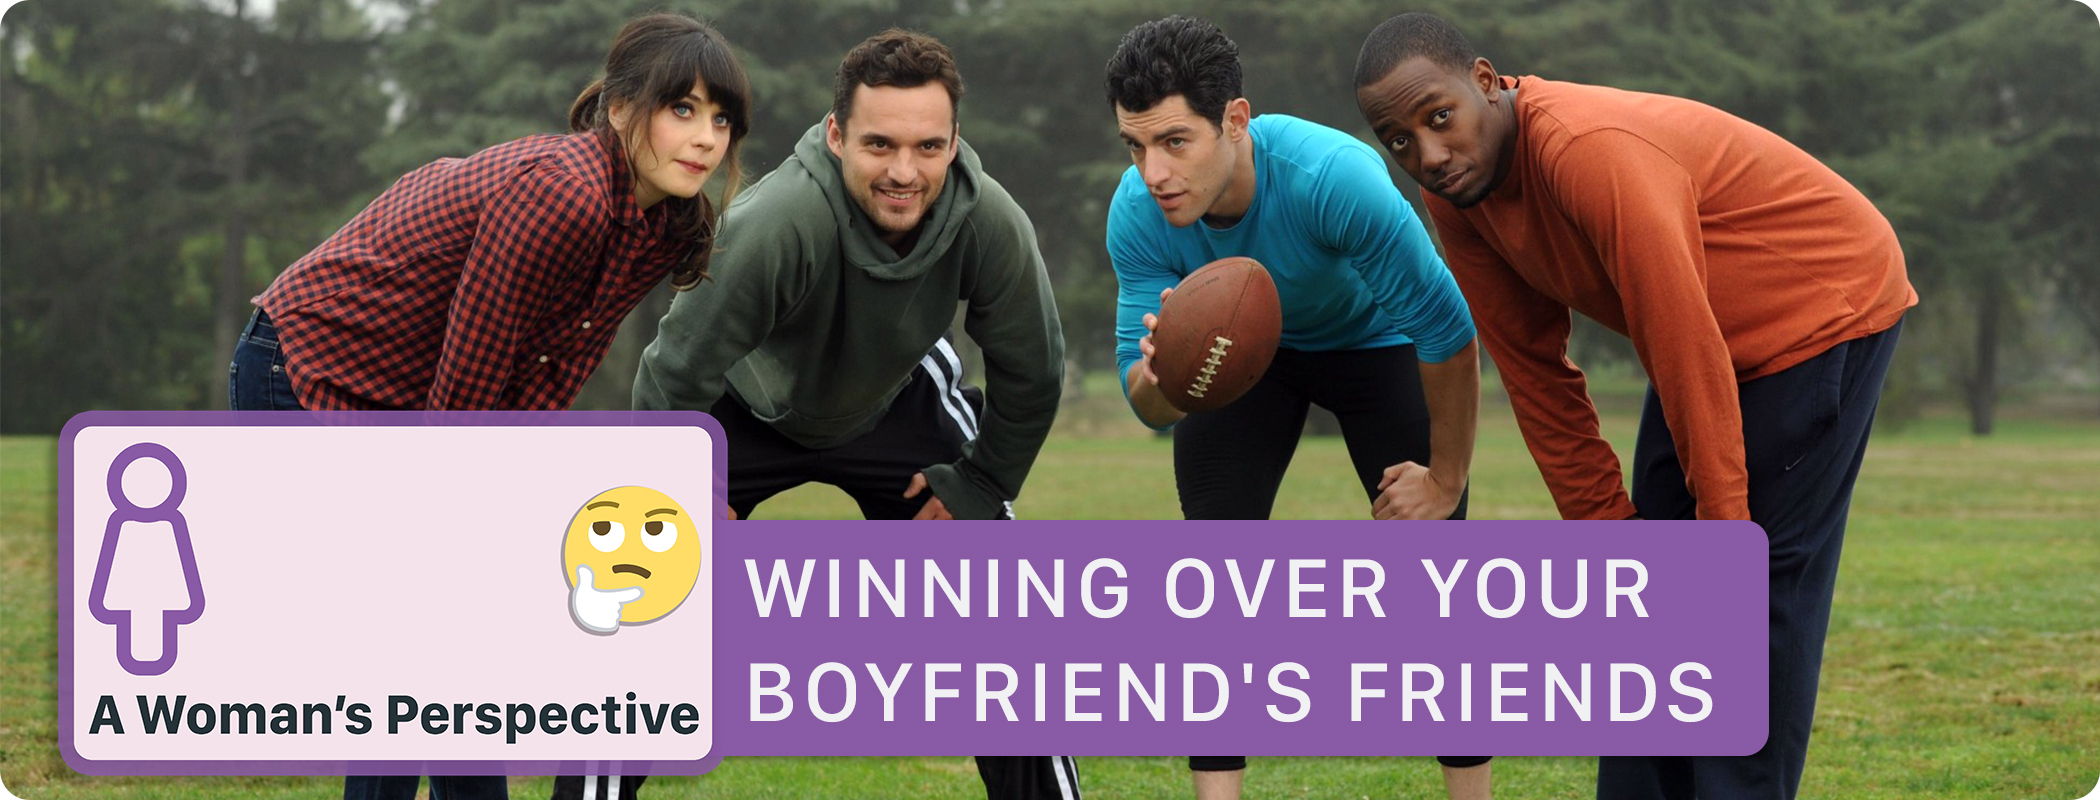 Winning Over Your Boyfriend's Friends - A Girl's Perspective